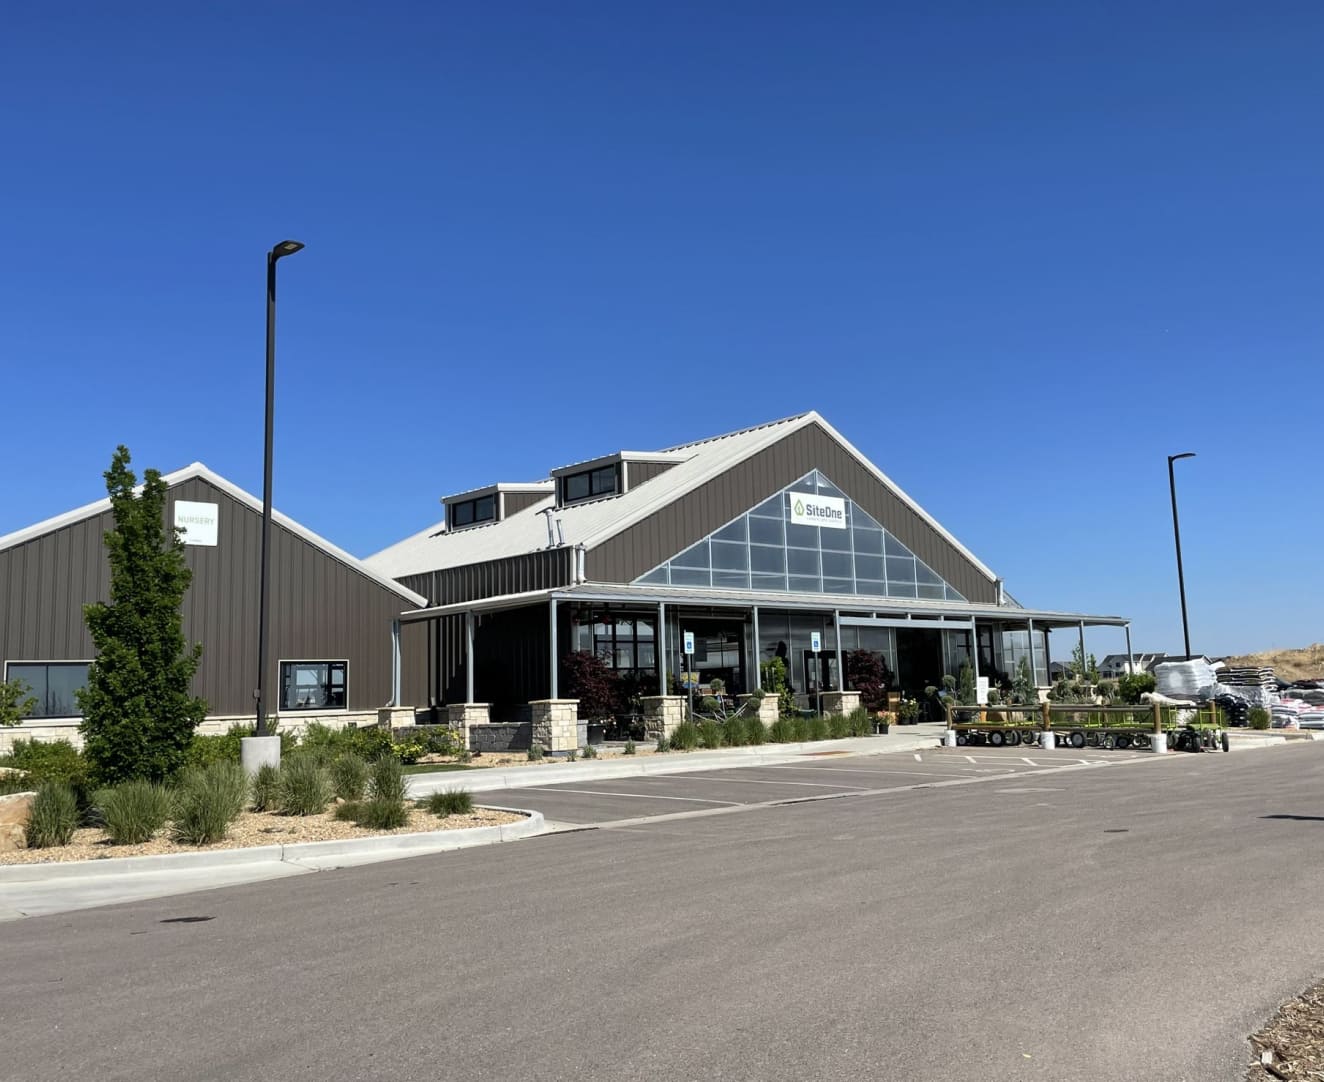 Leftside view of the parking lot and front entrance to 6166 Weld County Road 74 in Windsor, CO.